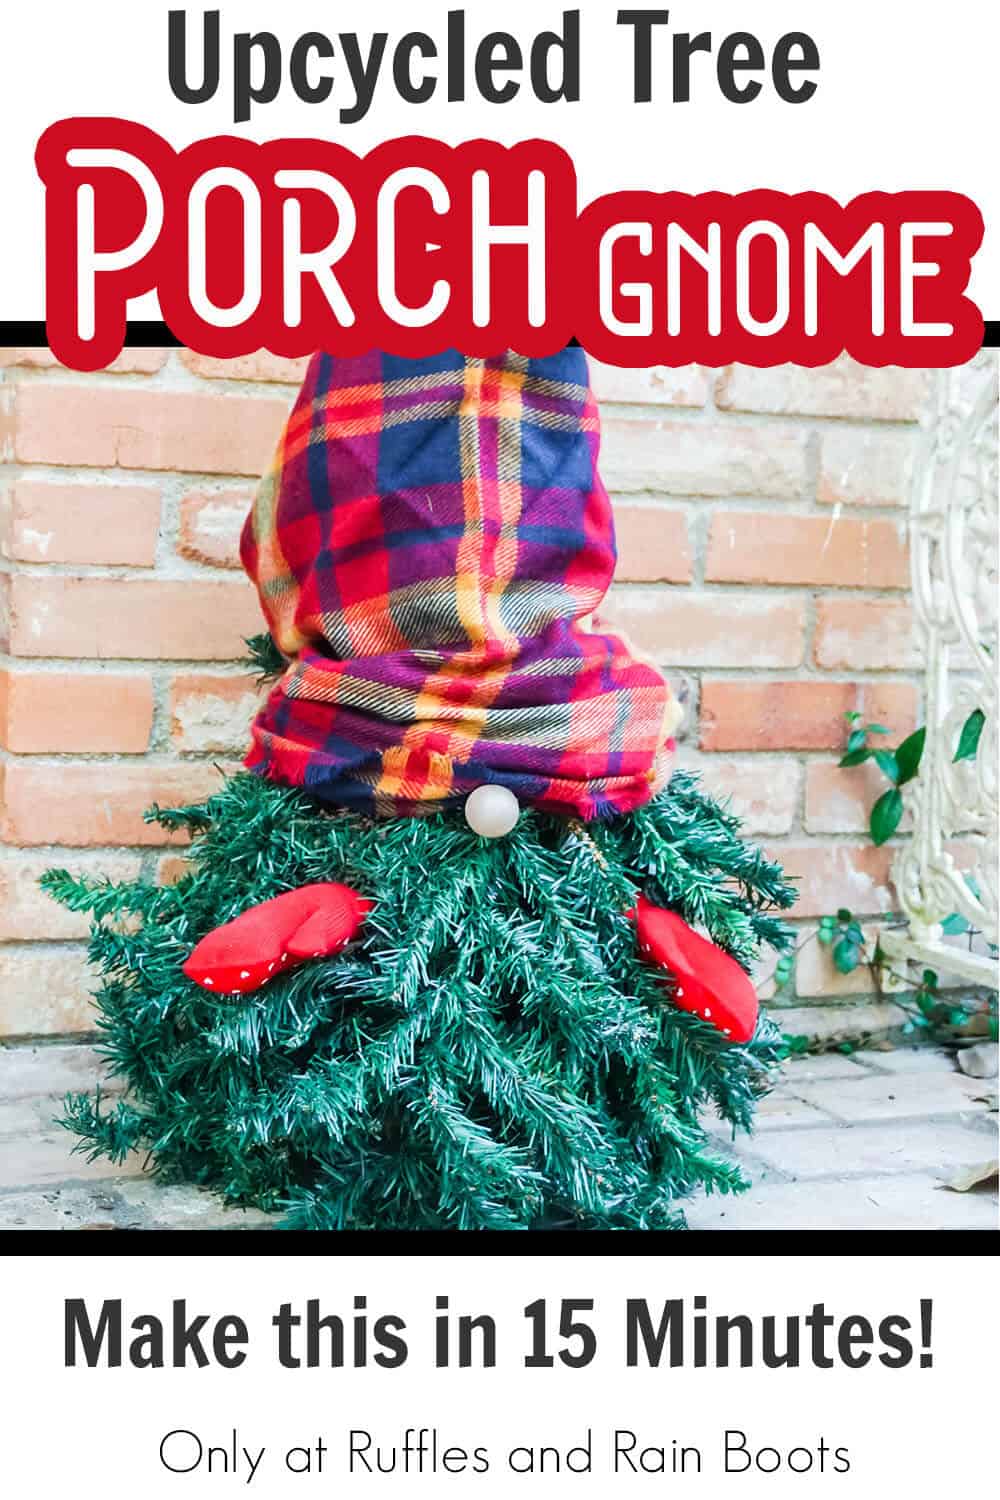 evergreen tree gnome with text which reads upcycled tree porch gnome make this in 15 minutes!